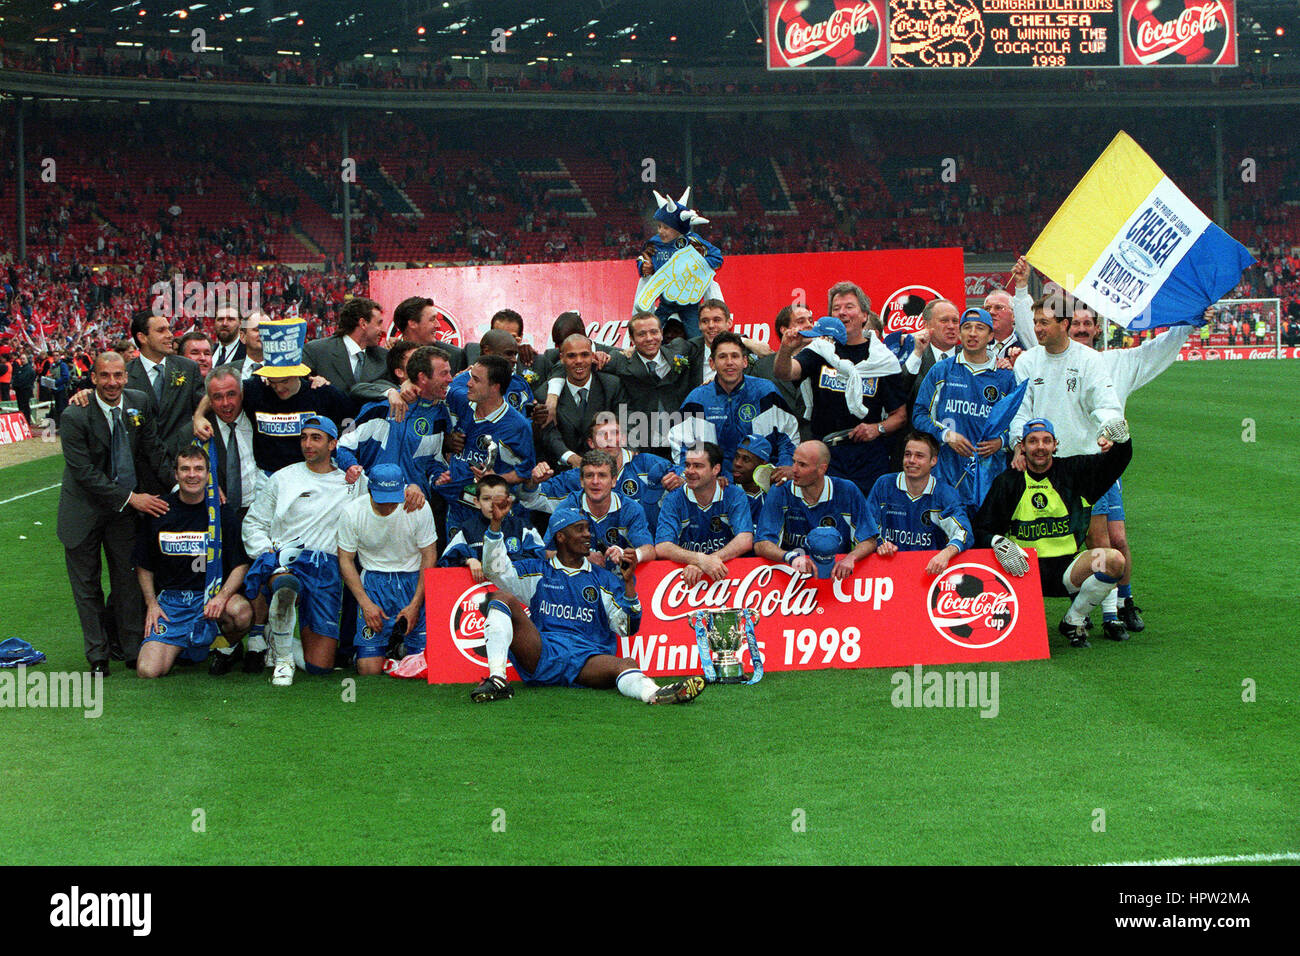 CHELSEA FOOTBALL TEAM COCA COLA CUP WINNERS 1998 30 March 1998 Stock Photo  - Alamy